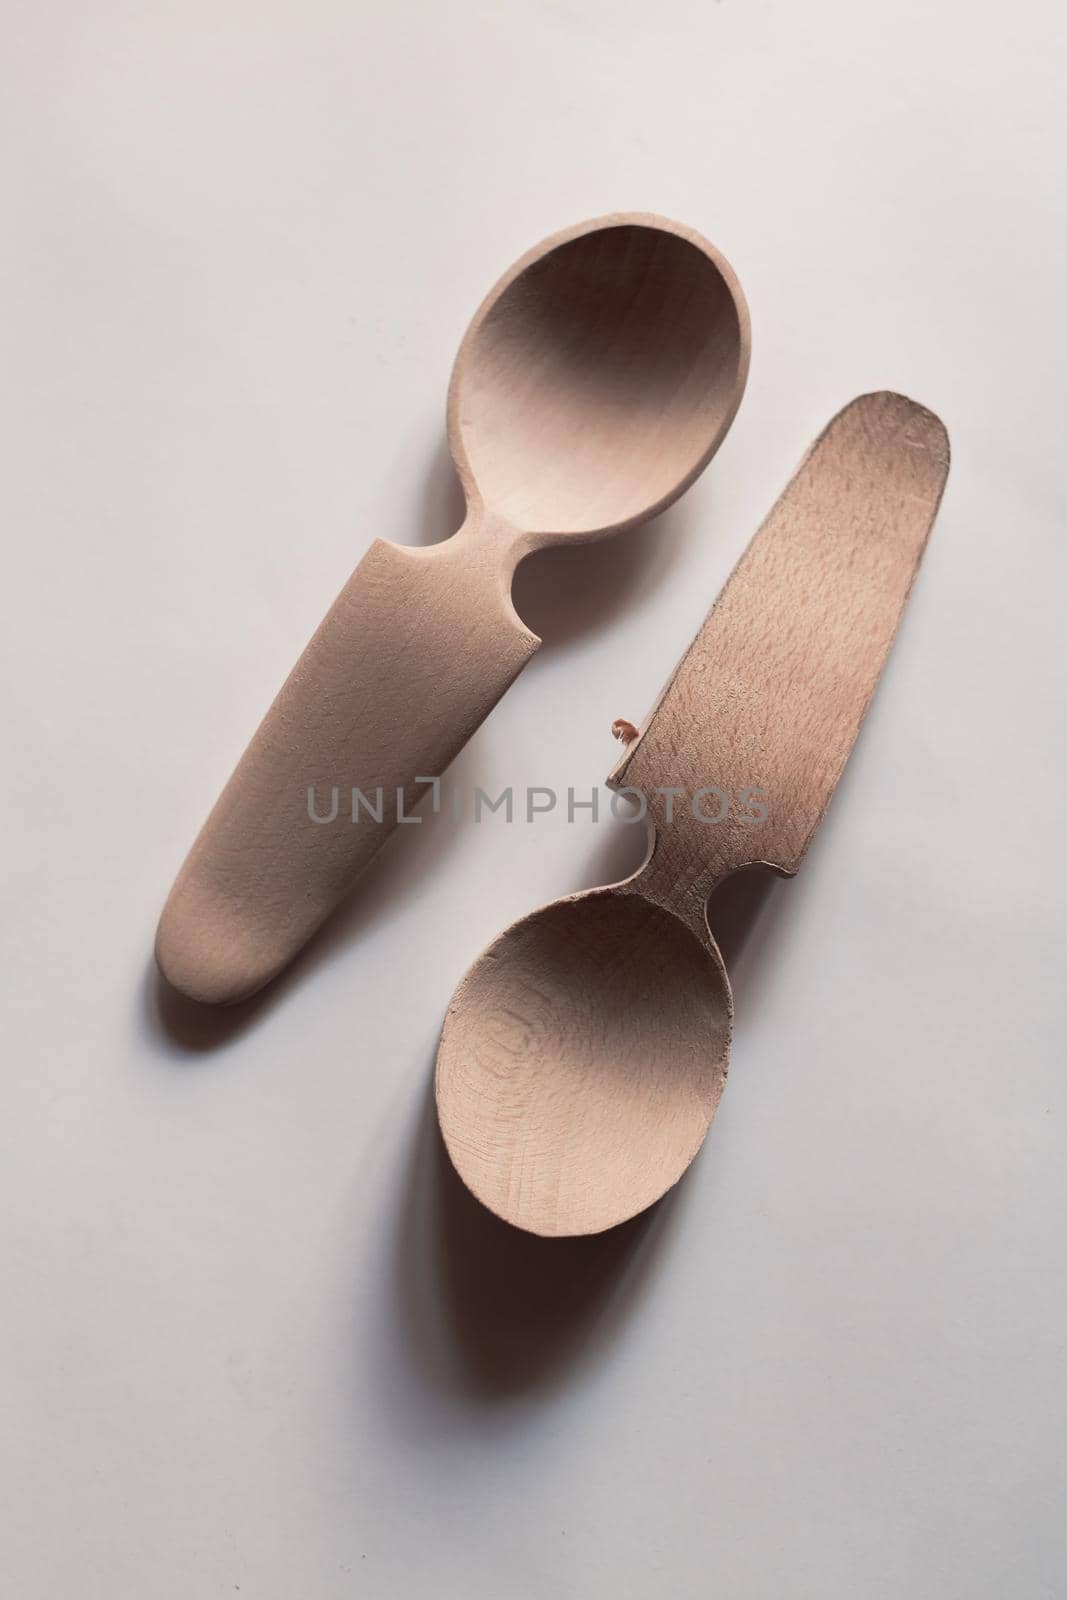 Handmade Wooden Spoons for hiking and outdoor activities. Craftsmanship and artisan concept by dotshock